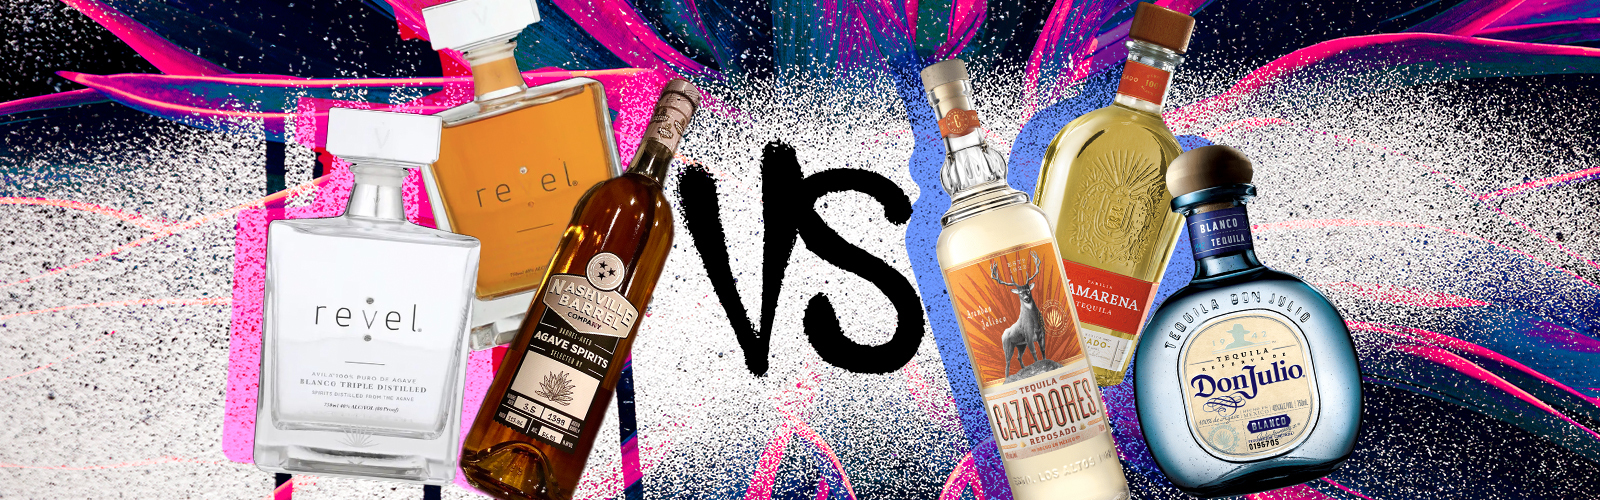 Agave Spirits Vs. Tequila